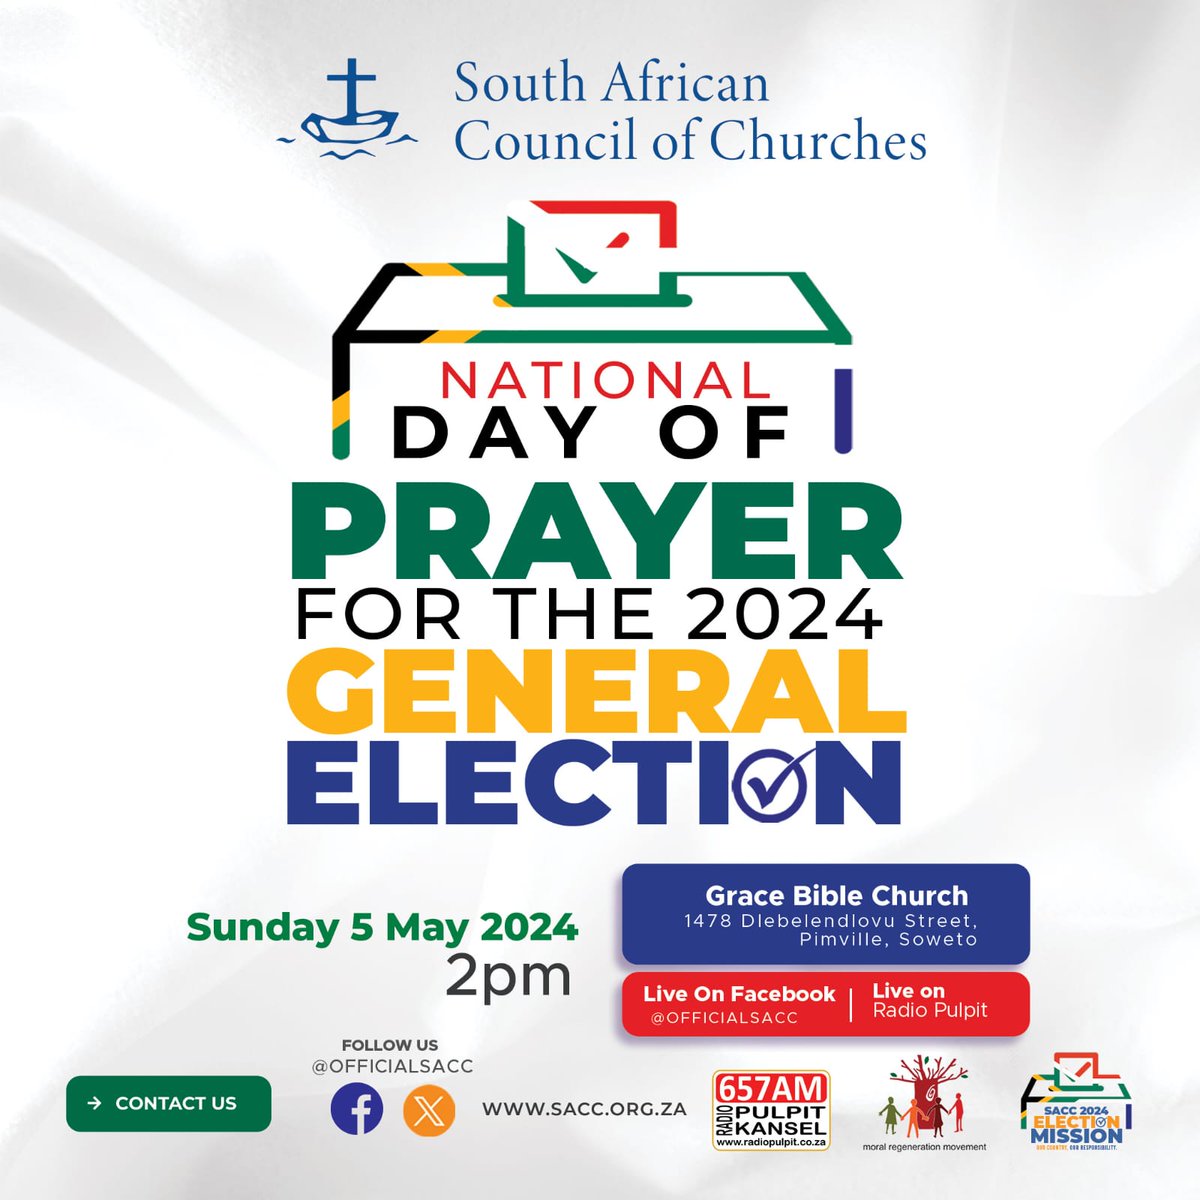 You're Invited! Event: South African Council of Churches National Day of Prayer for the 2024 General Elections! 🗳️🙏 Date: 5 May 2024 Time: 2PM Location: Grace Bible Church, Soweto Pimville